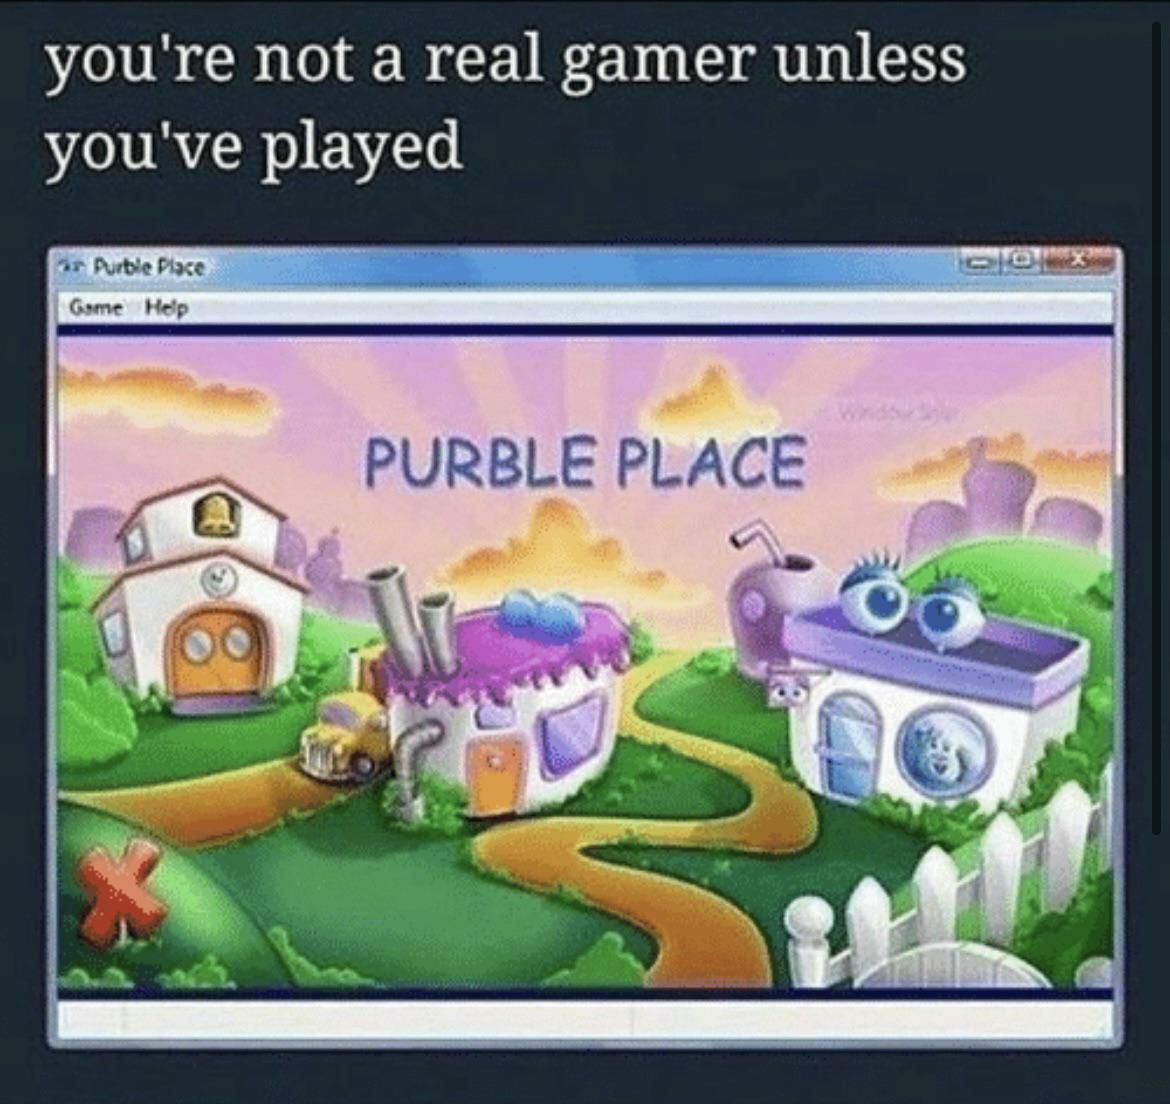 Real gamers stand up!